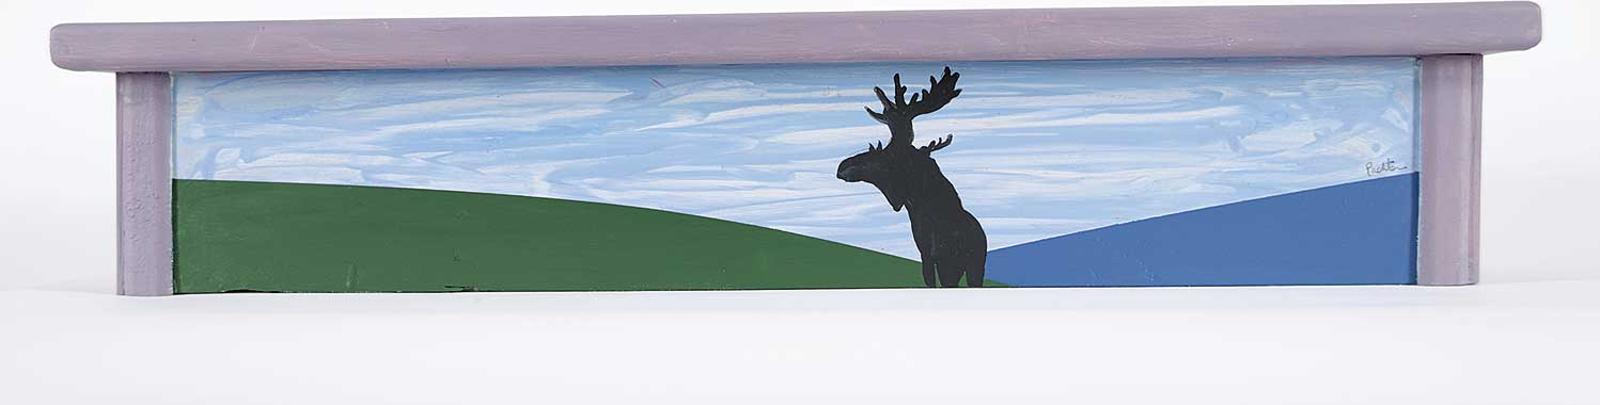 Charles Pachter (1942) - Untitled - Flower Planter with Moose